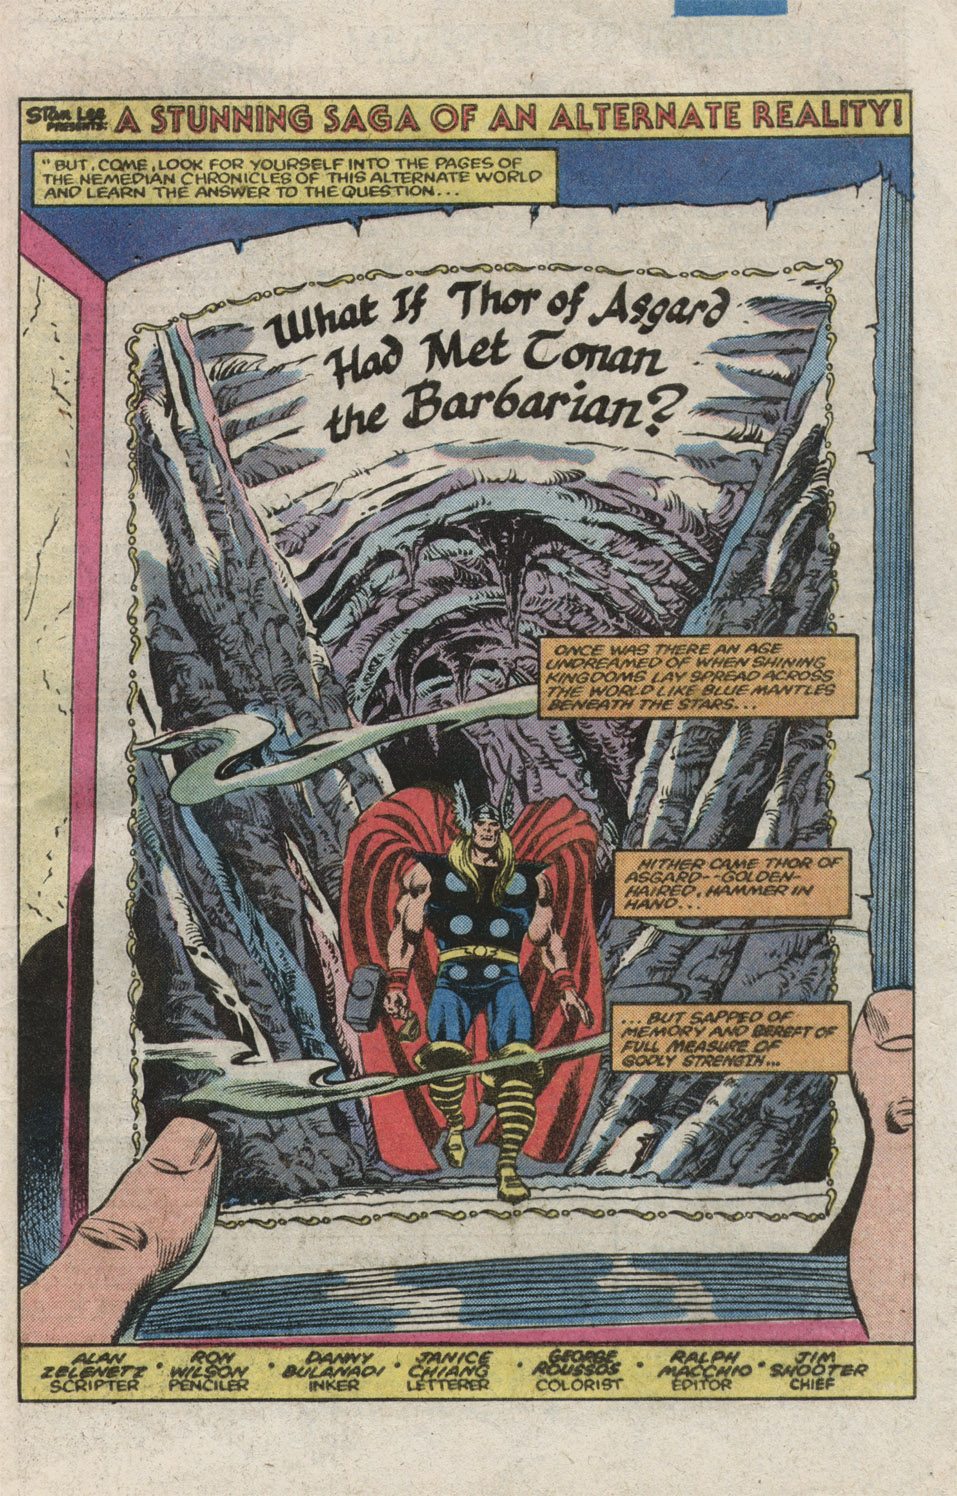 What If? (1977) issue 39 - Thor battled conan - Page 5